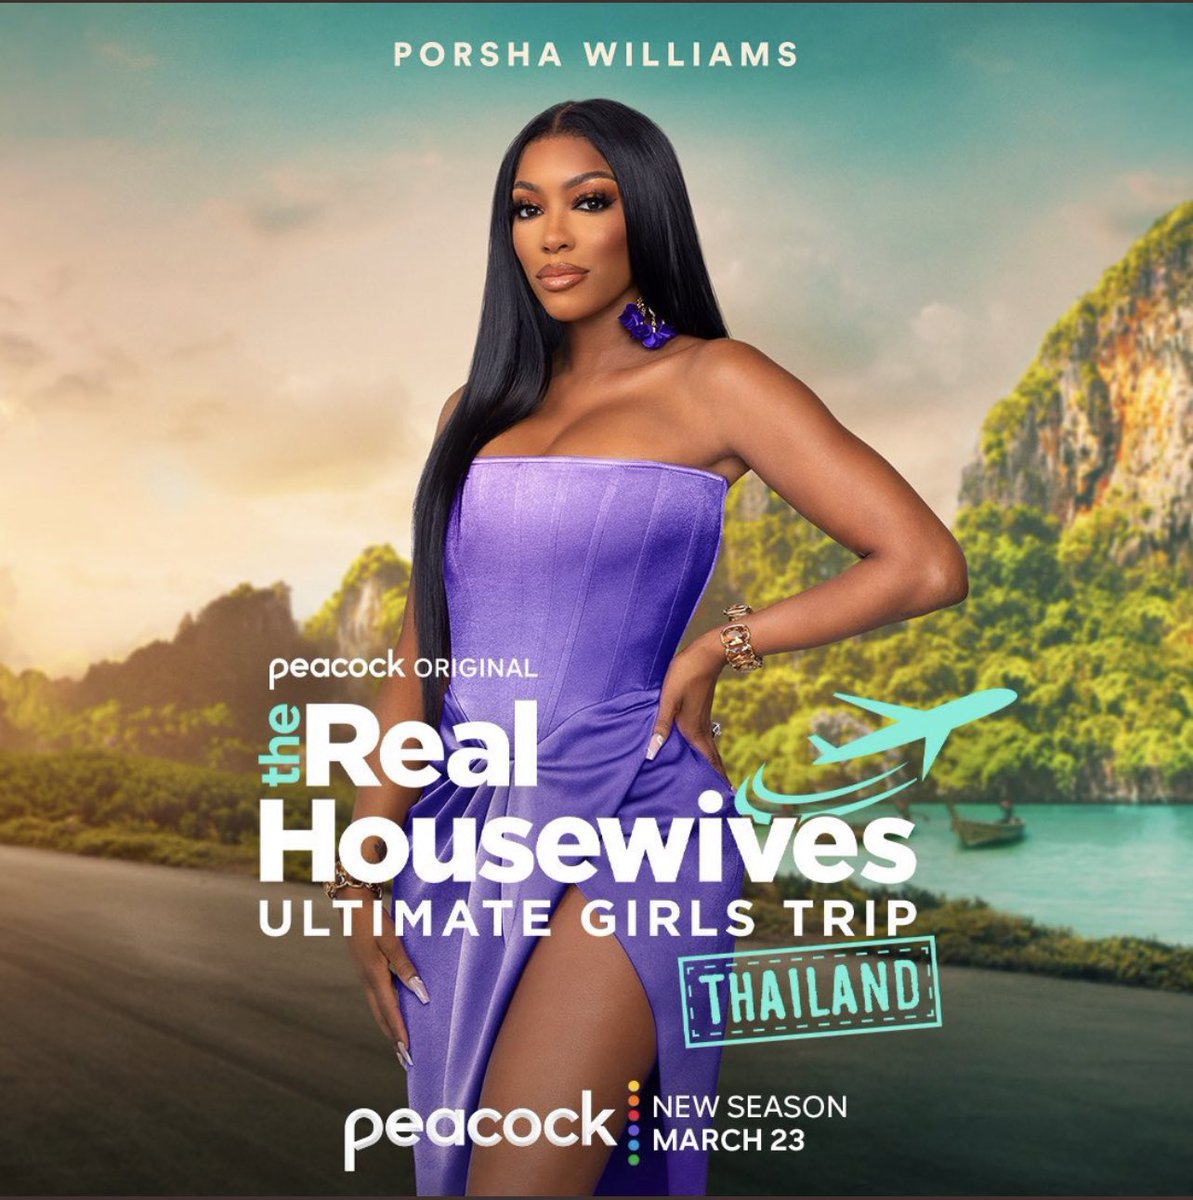 And if anyone got something negative to say about @Porsha4real  with this serve, I’d be convinced that you a hater… PERIOD!!! Come thru queen #RHUGT3 #porshawilliams #RHOA